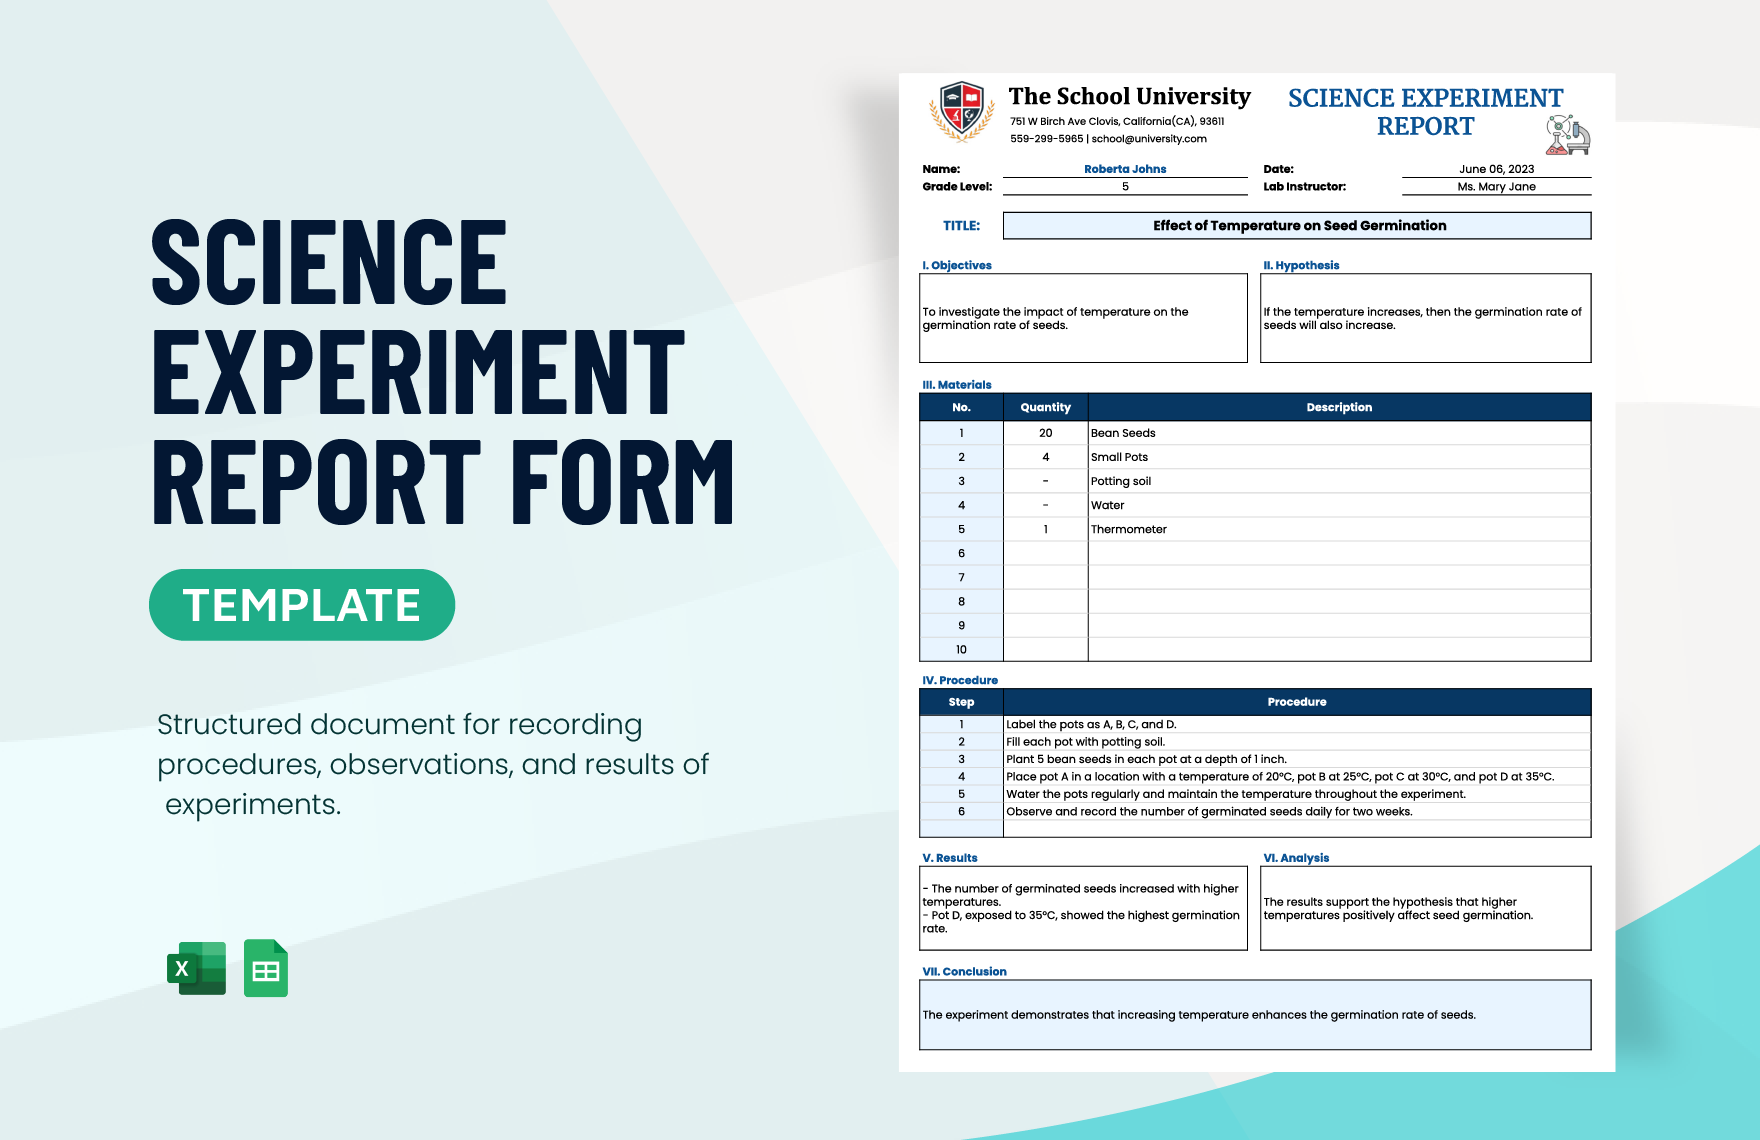 Science Experiment Report Form Template